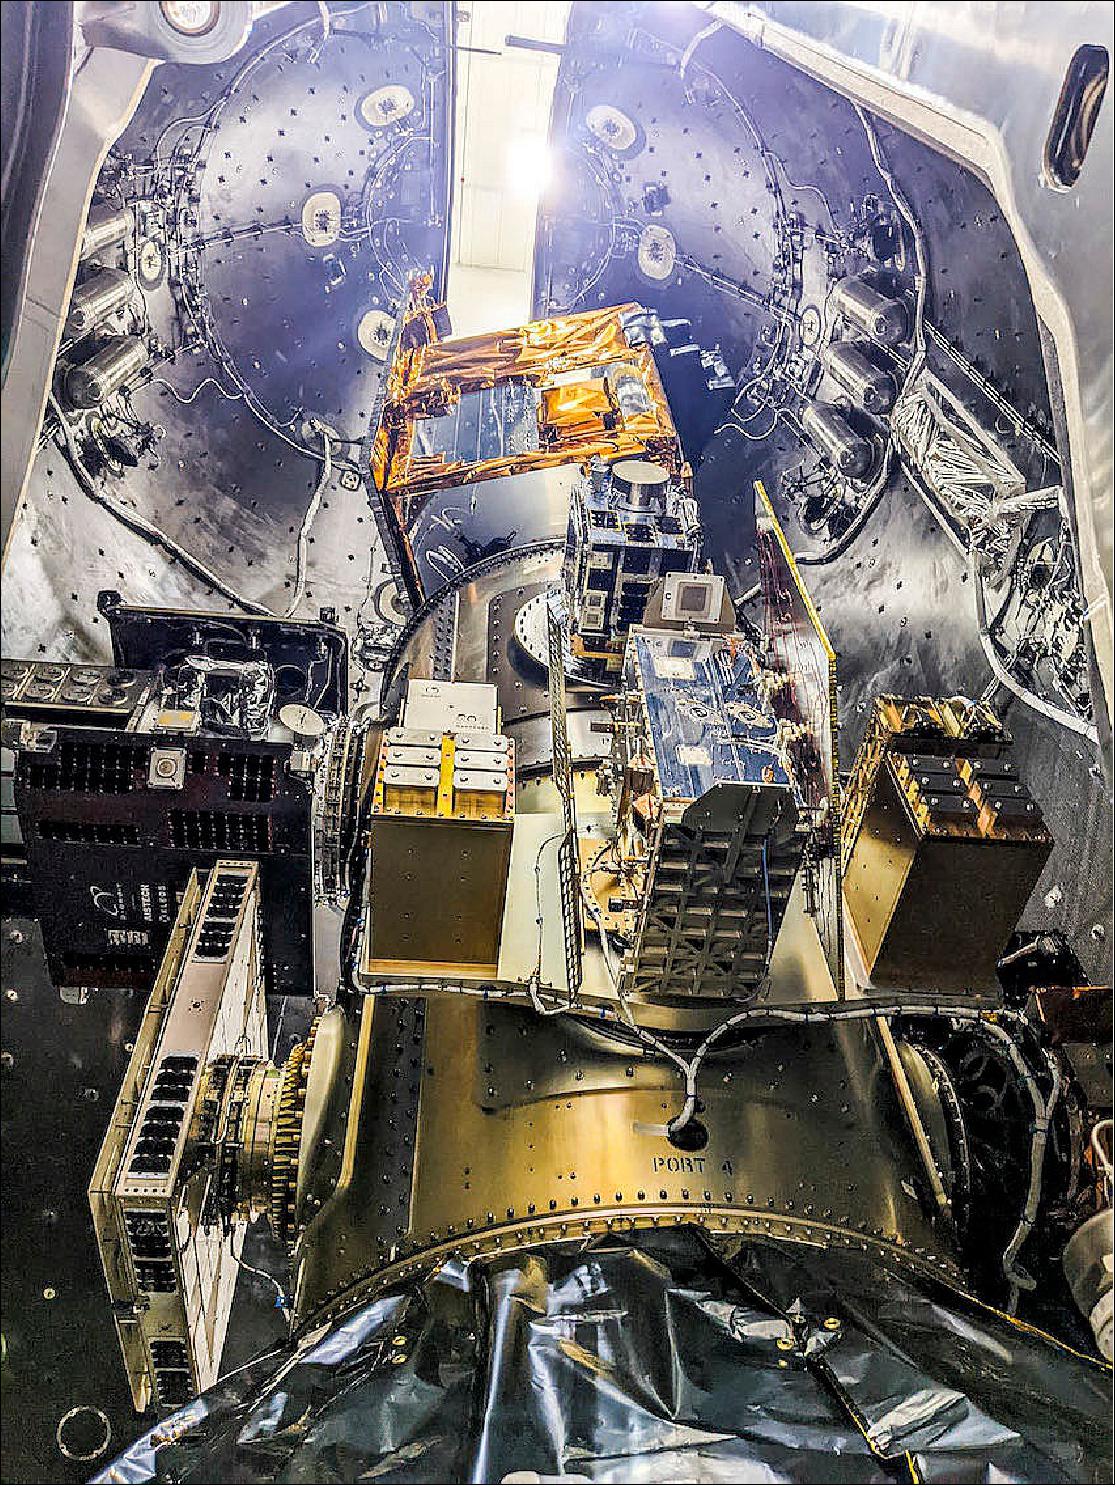 Figure 14: The satellites riding on SpaceX’s Transporter-4 rideshare mission during encapsulation inside the Falcon 9 rocket’s payload fairing. Germany’s EnMAP satellite is seen on top of the stack (image credit: SpaceX)